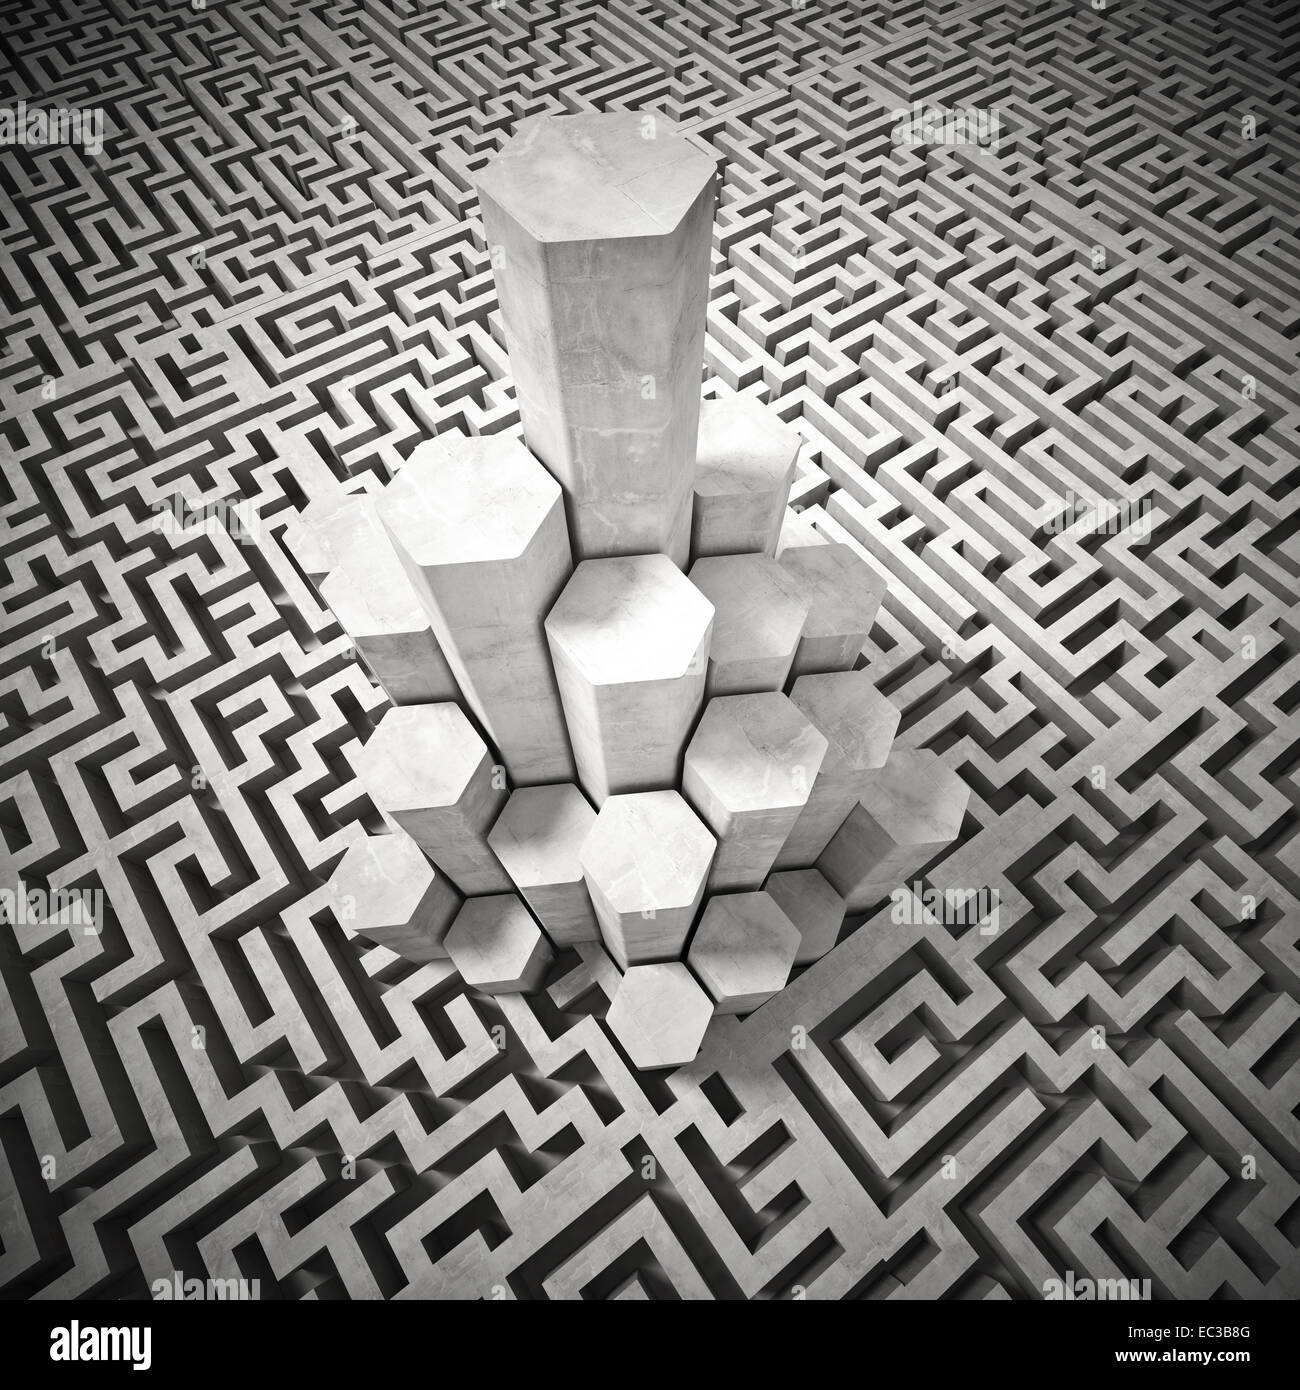 3d image of tall tower and maze Stock Photo